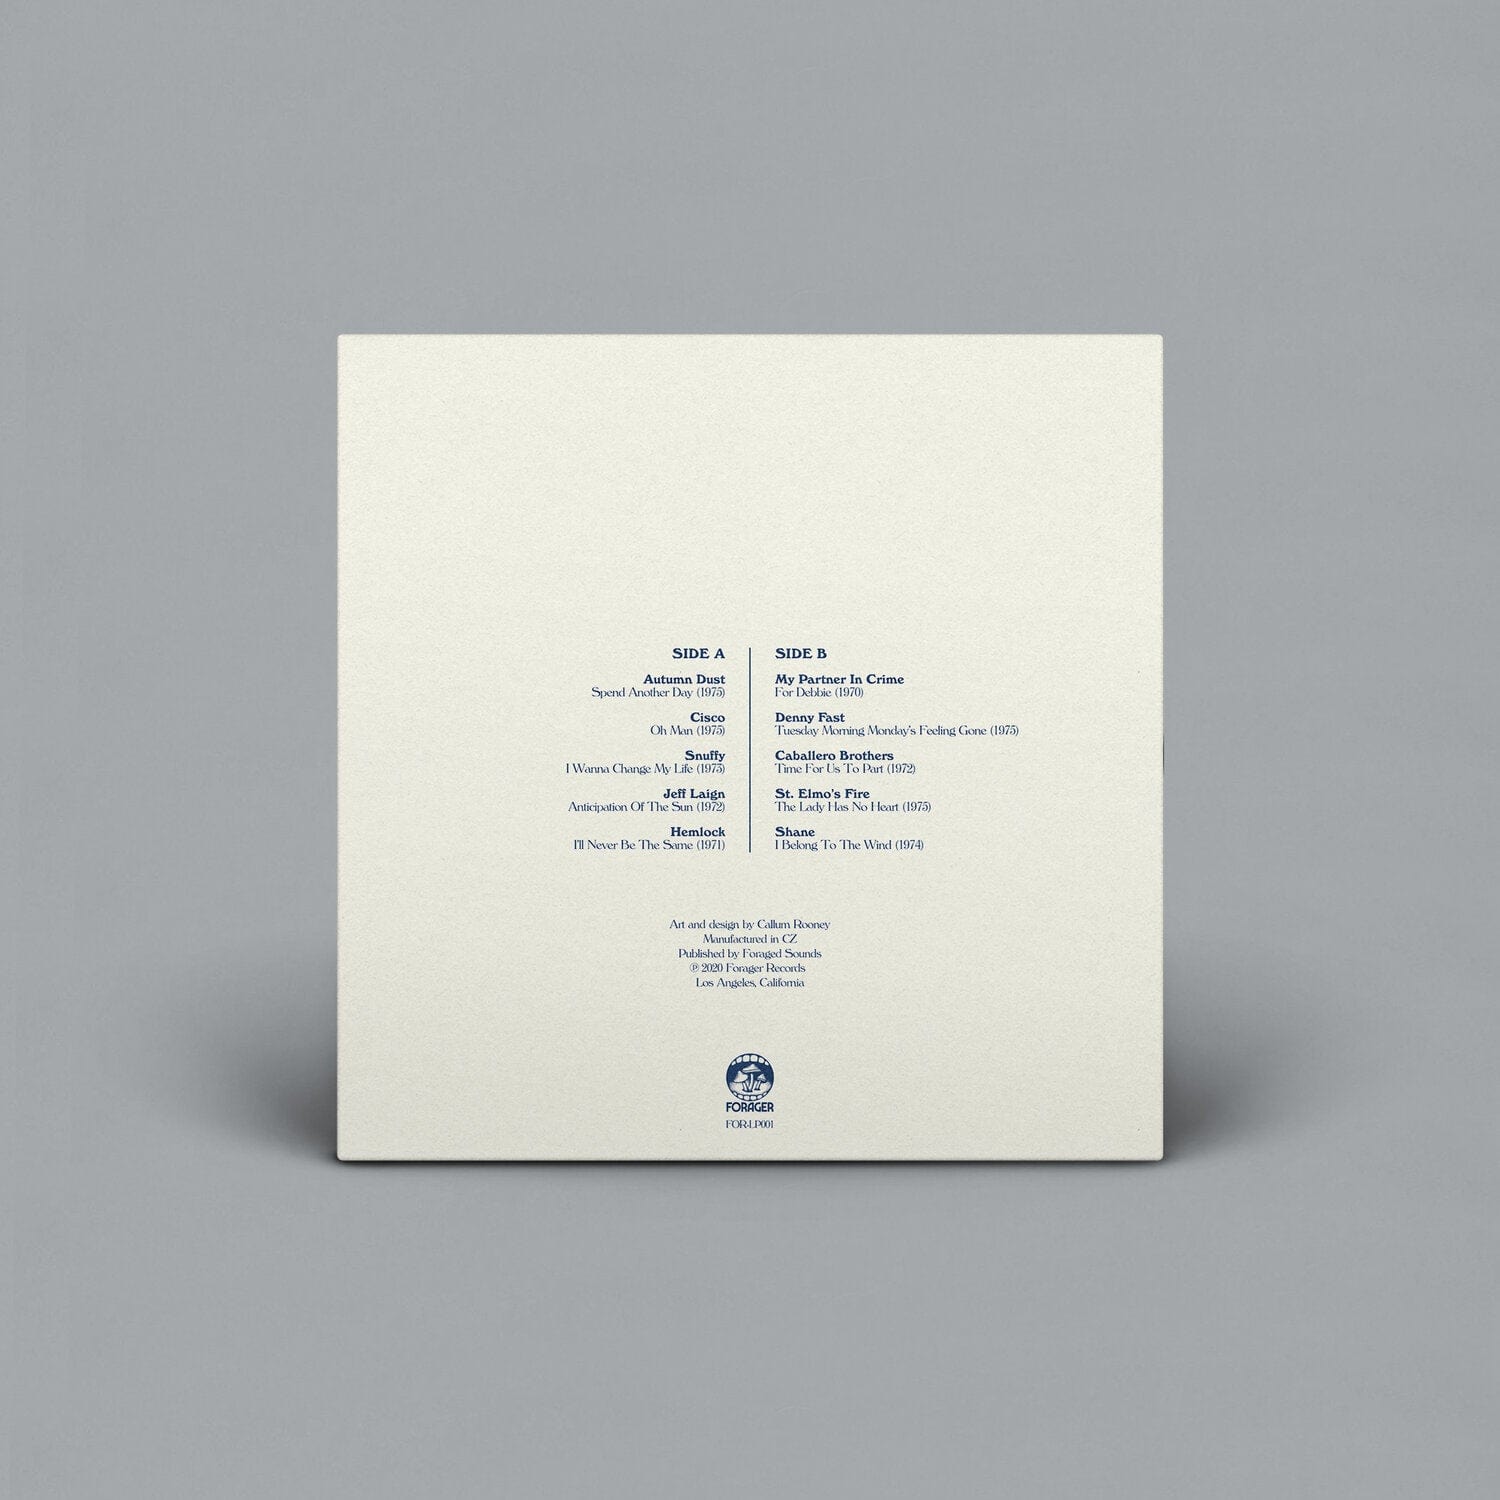 FOR-LP001 - Various Artists - Belong To The Wind